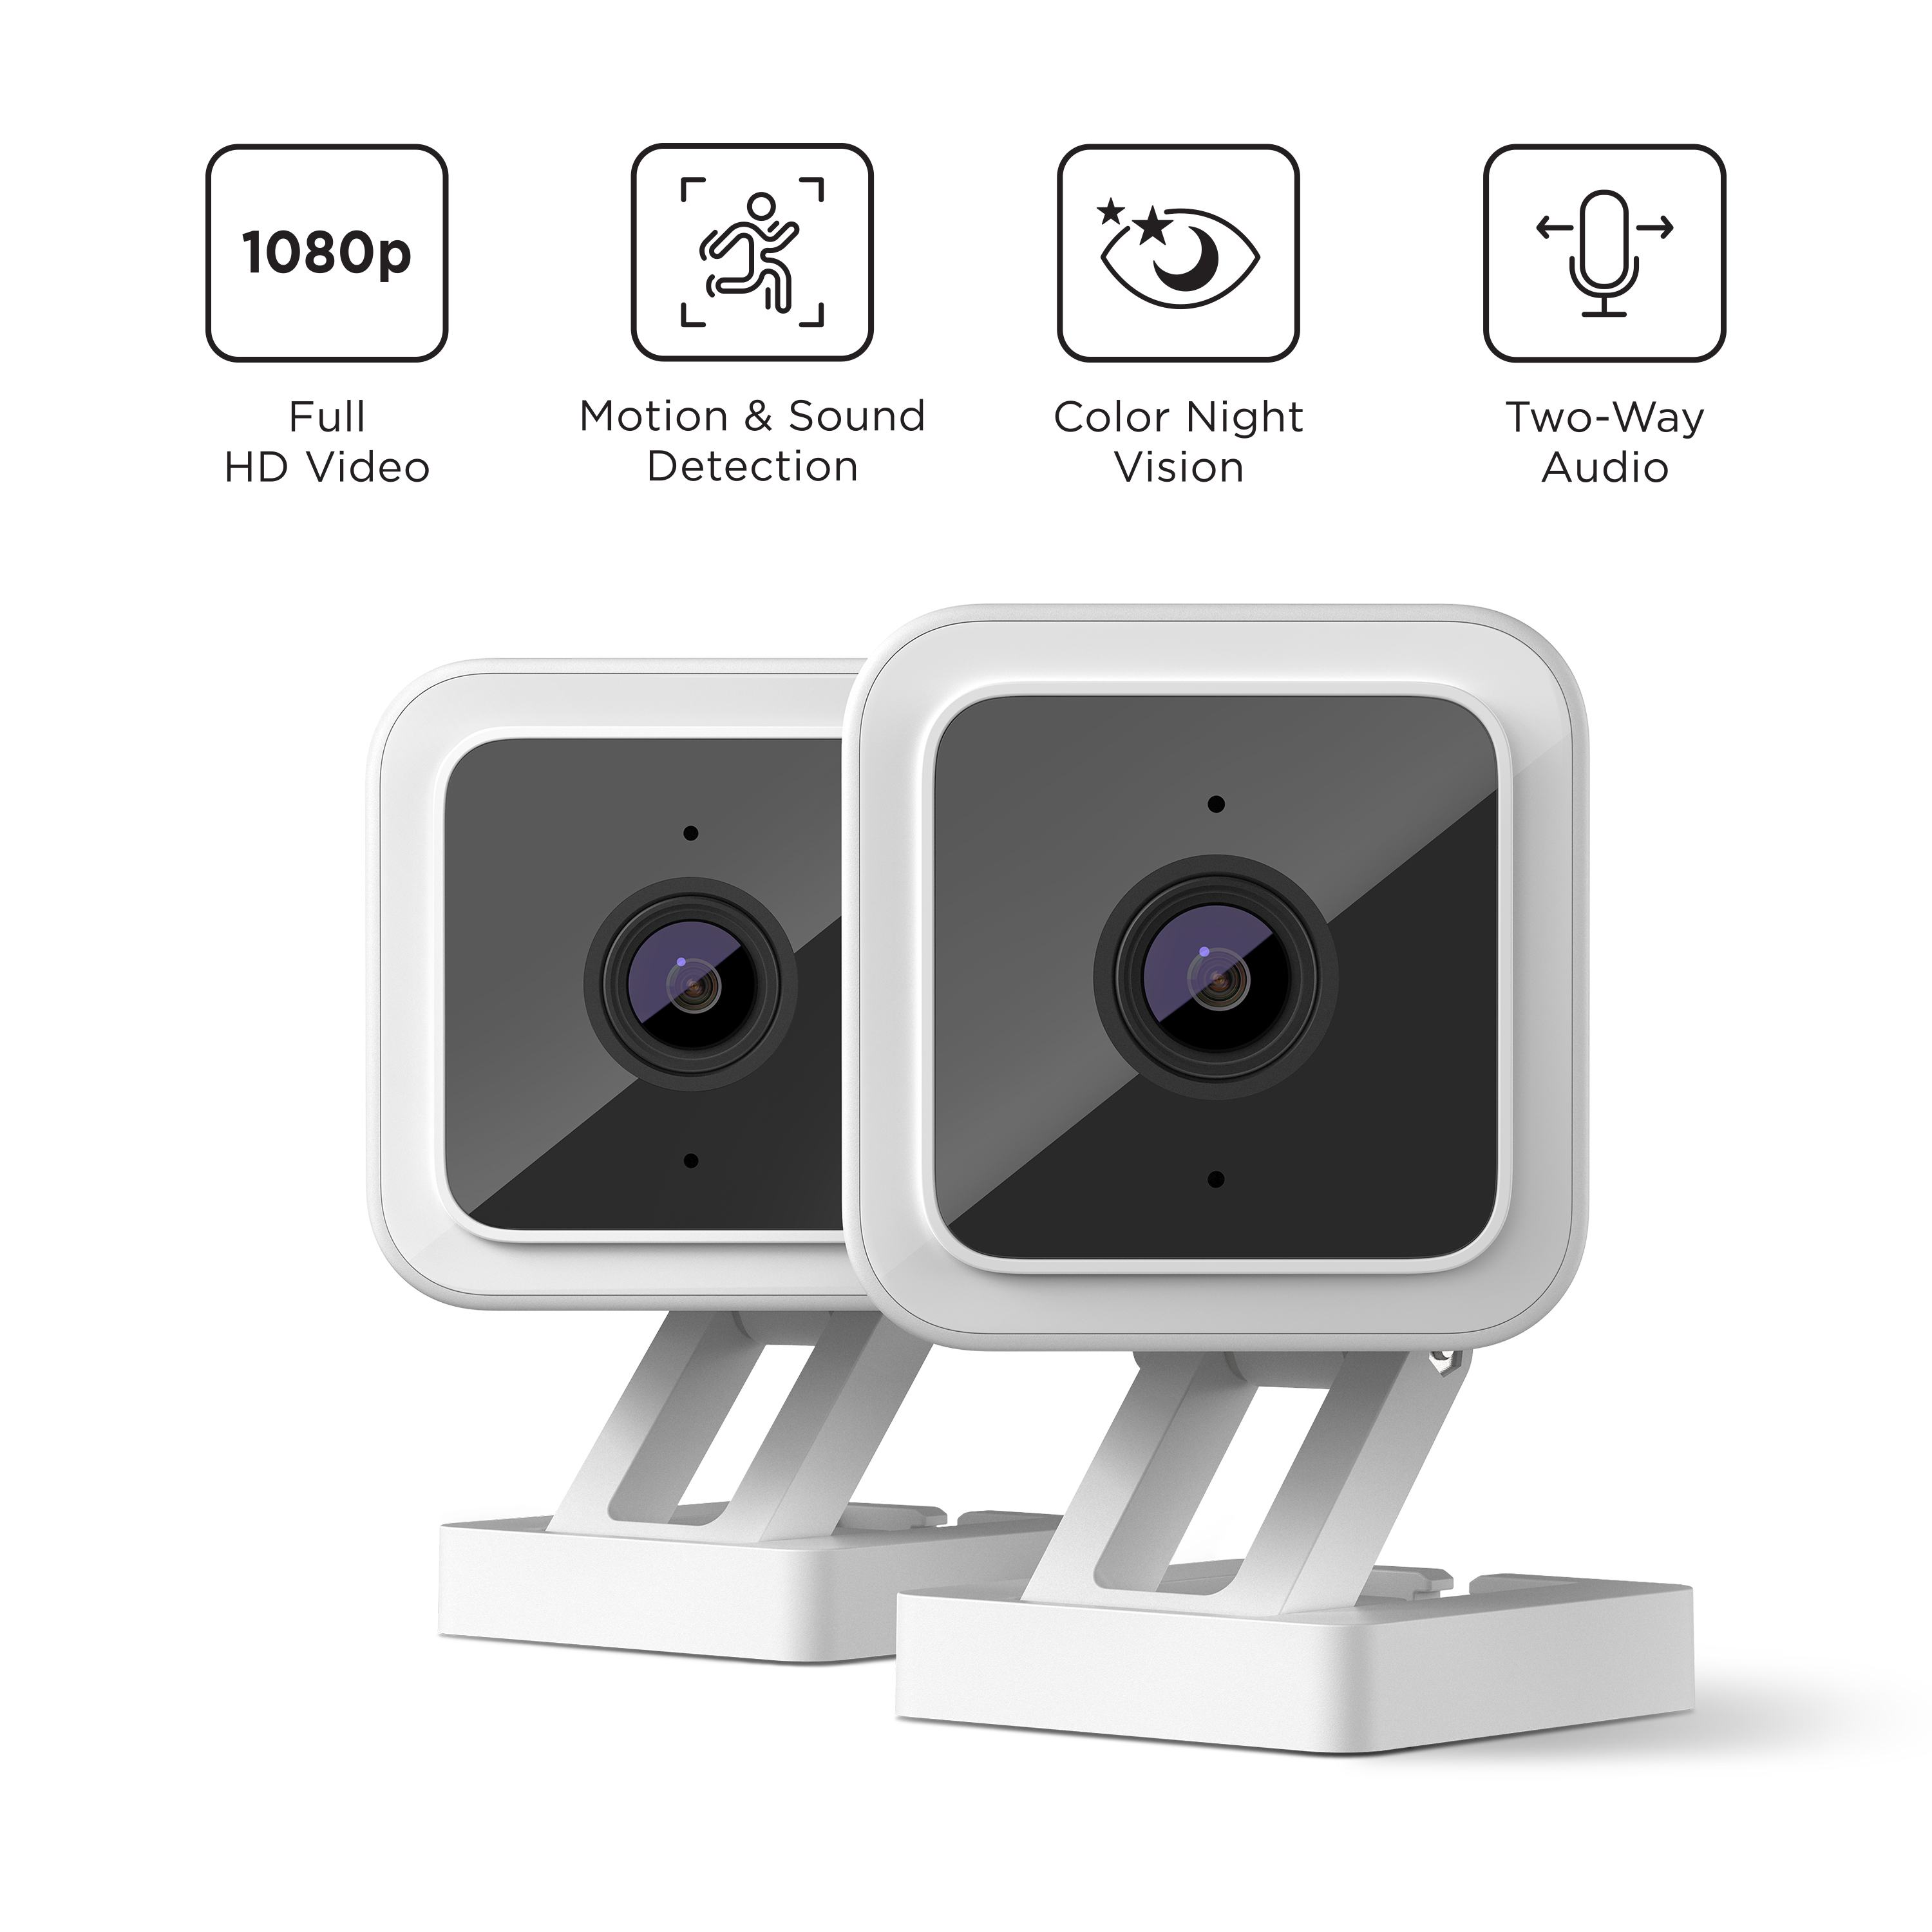 Roku Smart Home Indoor Camera SE (2-Pack) Wi-Fi-Connected - Wired Security Surveillance Camera with Motion & Sound Detection - image 3 of 9